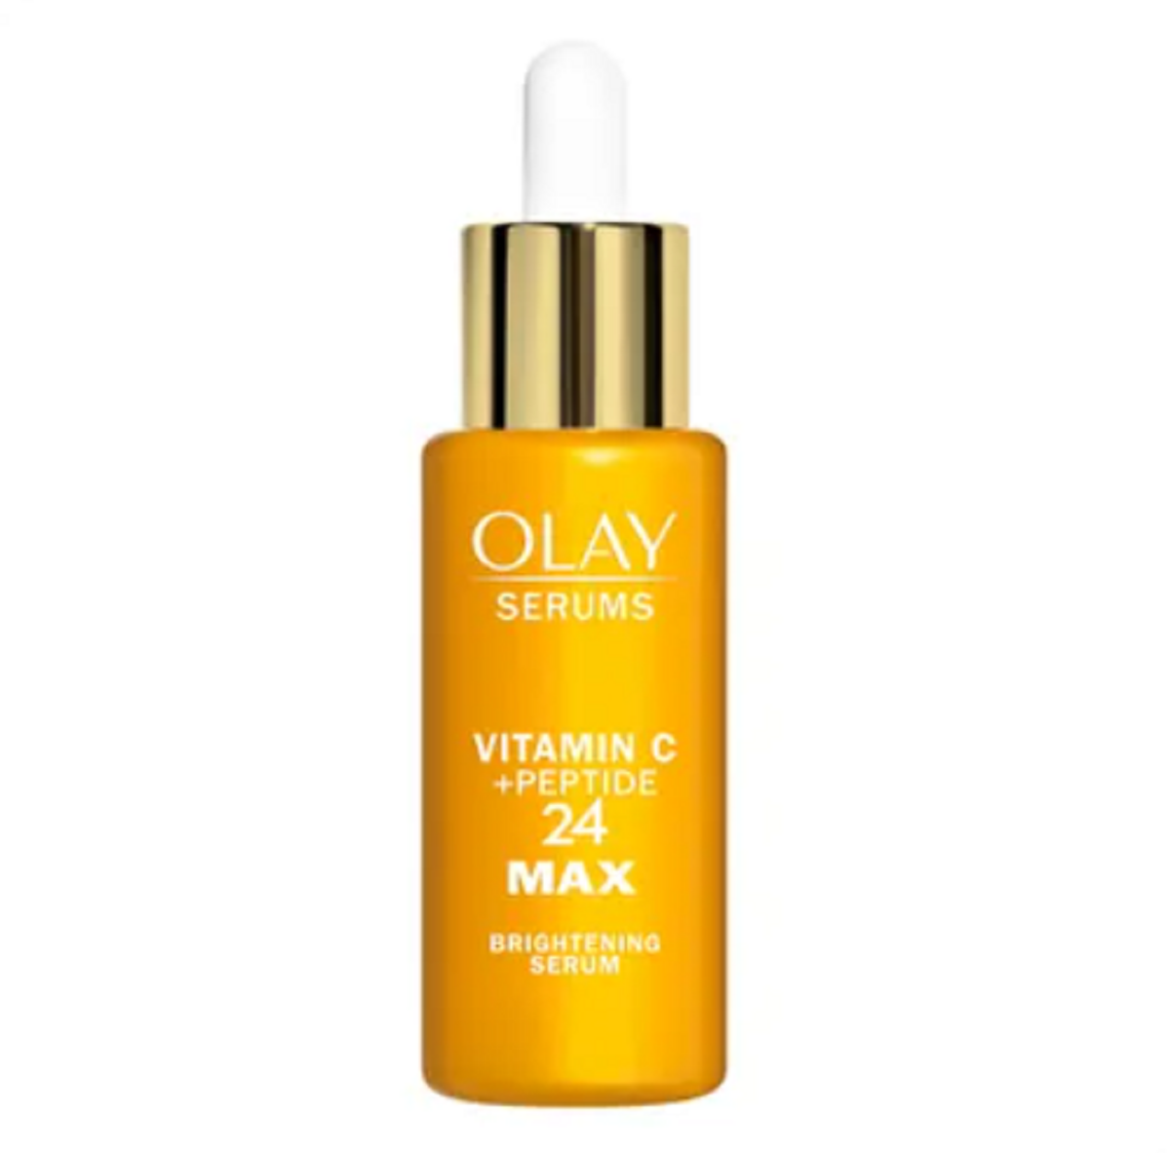 Olay-Vitamin-C-Peptide-24-Max-Serum-1.3-fl-oz, Happy Mothers Day Gift